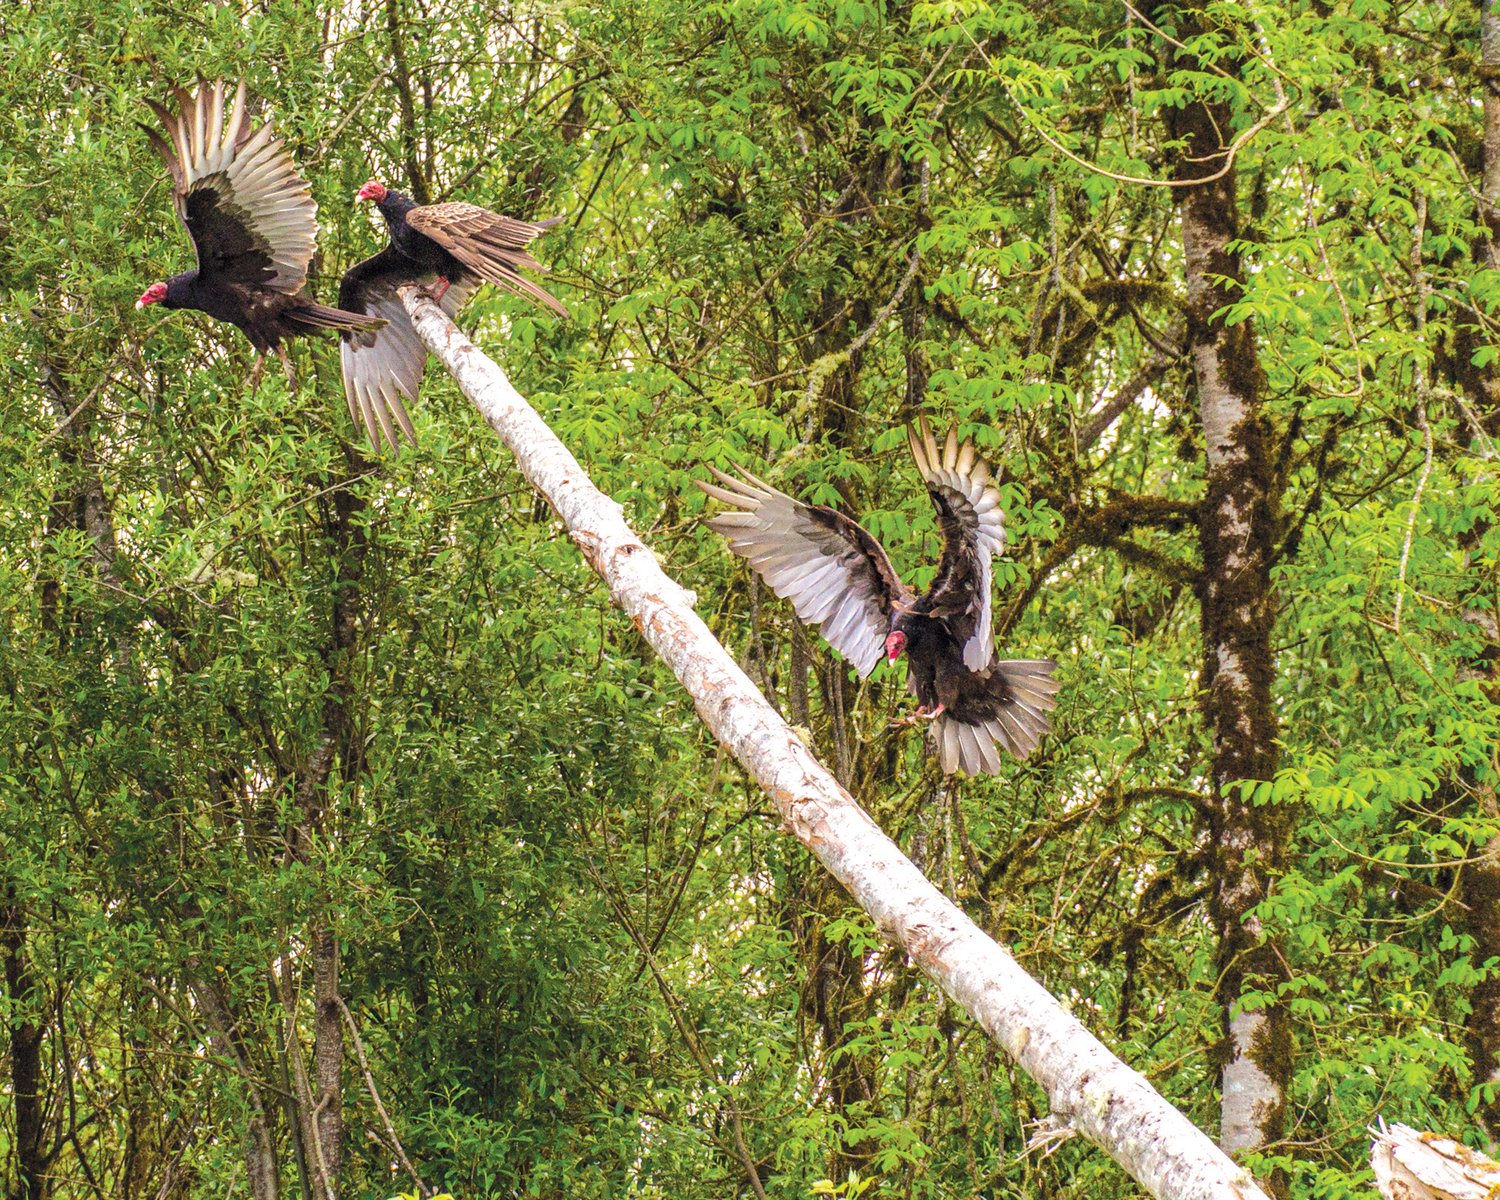 Turkey vultures spread their wings along the Chehalis River near Montesano.